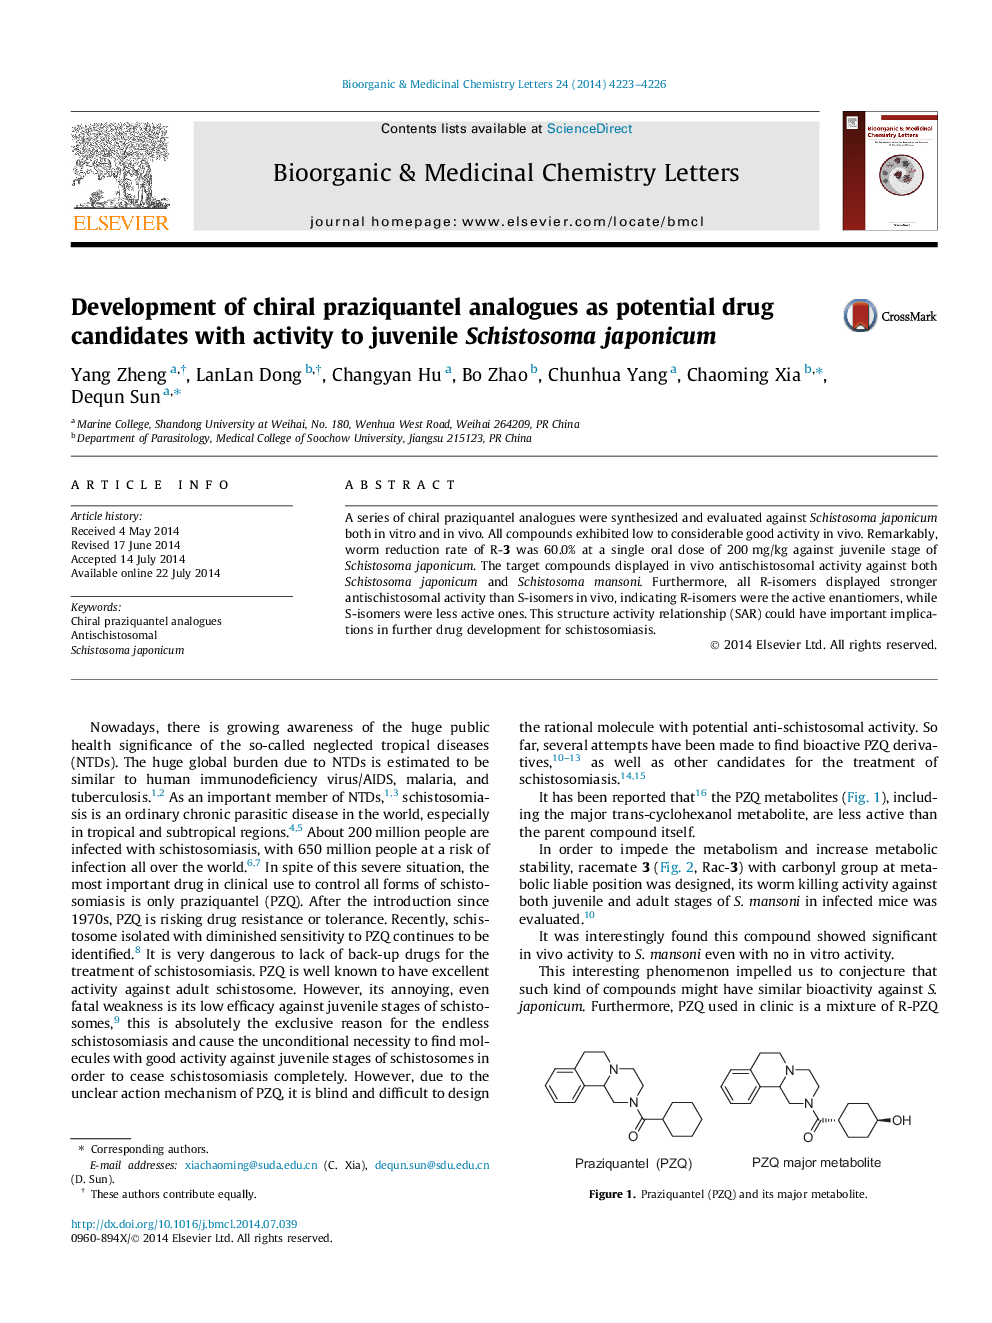 Development of chiral praziquantel analogues as potential drug candidates with activity to juvenile Schistosoma japonicum